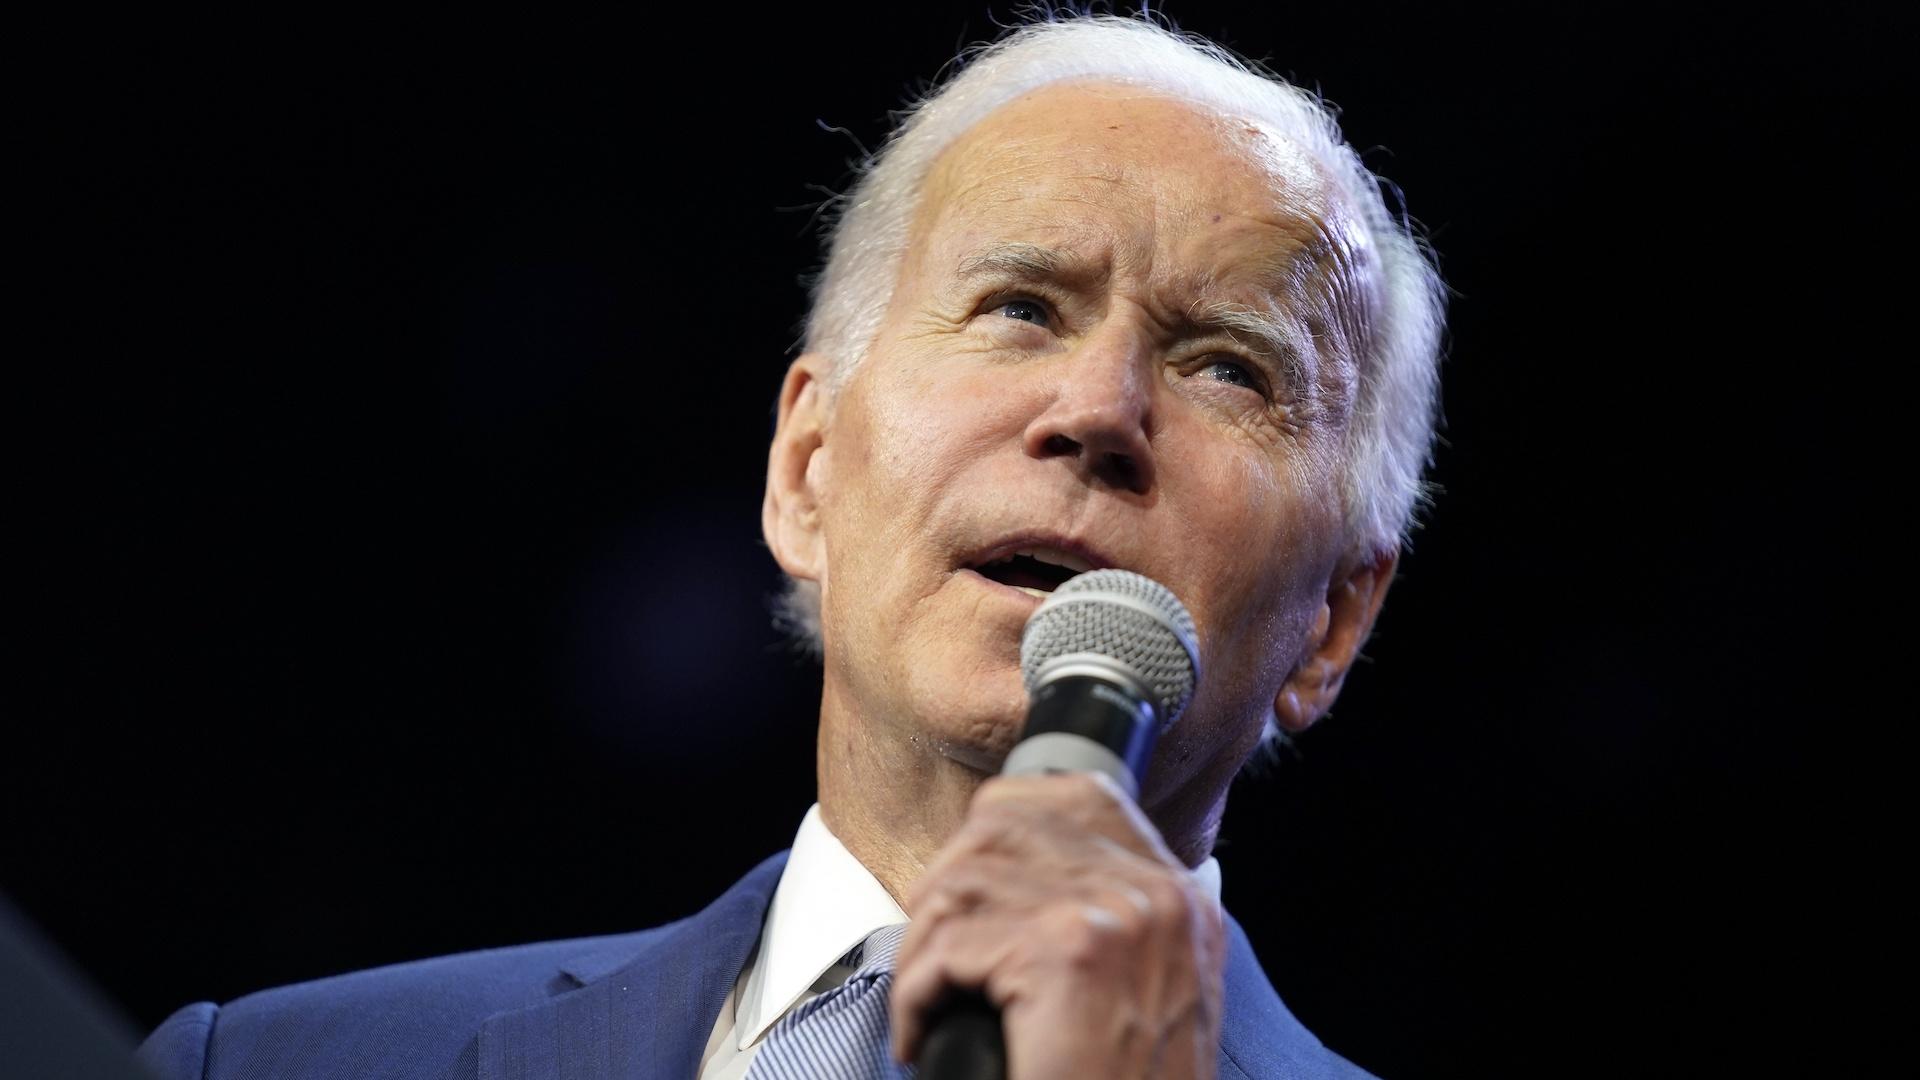 President Joe Biden speaks during a Democratic National Committee event at the Howard Theatre, Tuesday, Oct. 18, 2022, in Washington. (AP Photo/Evan Vucci)